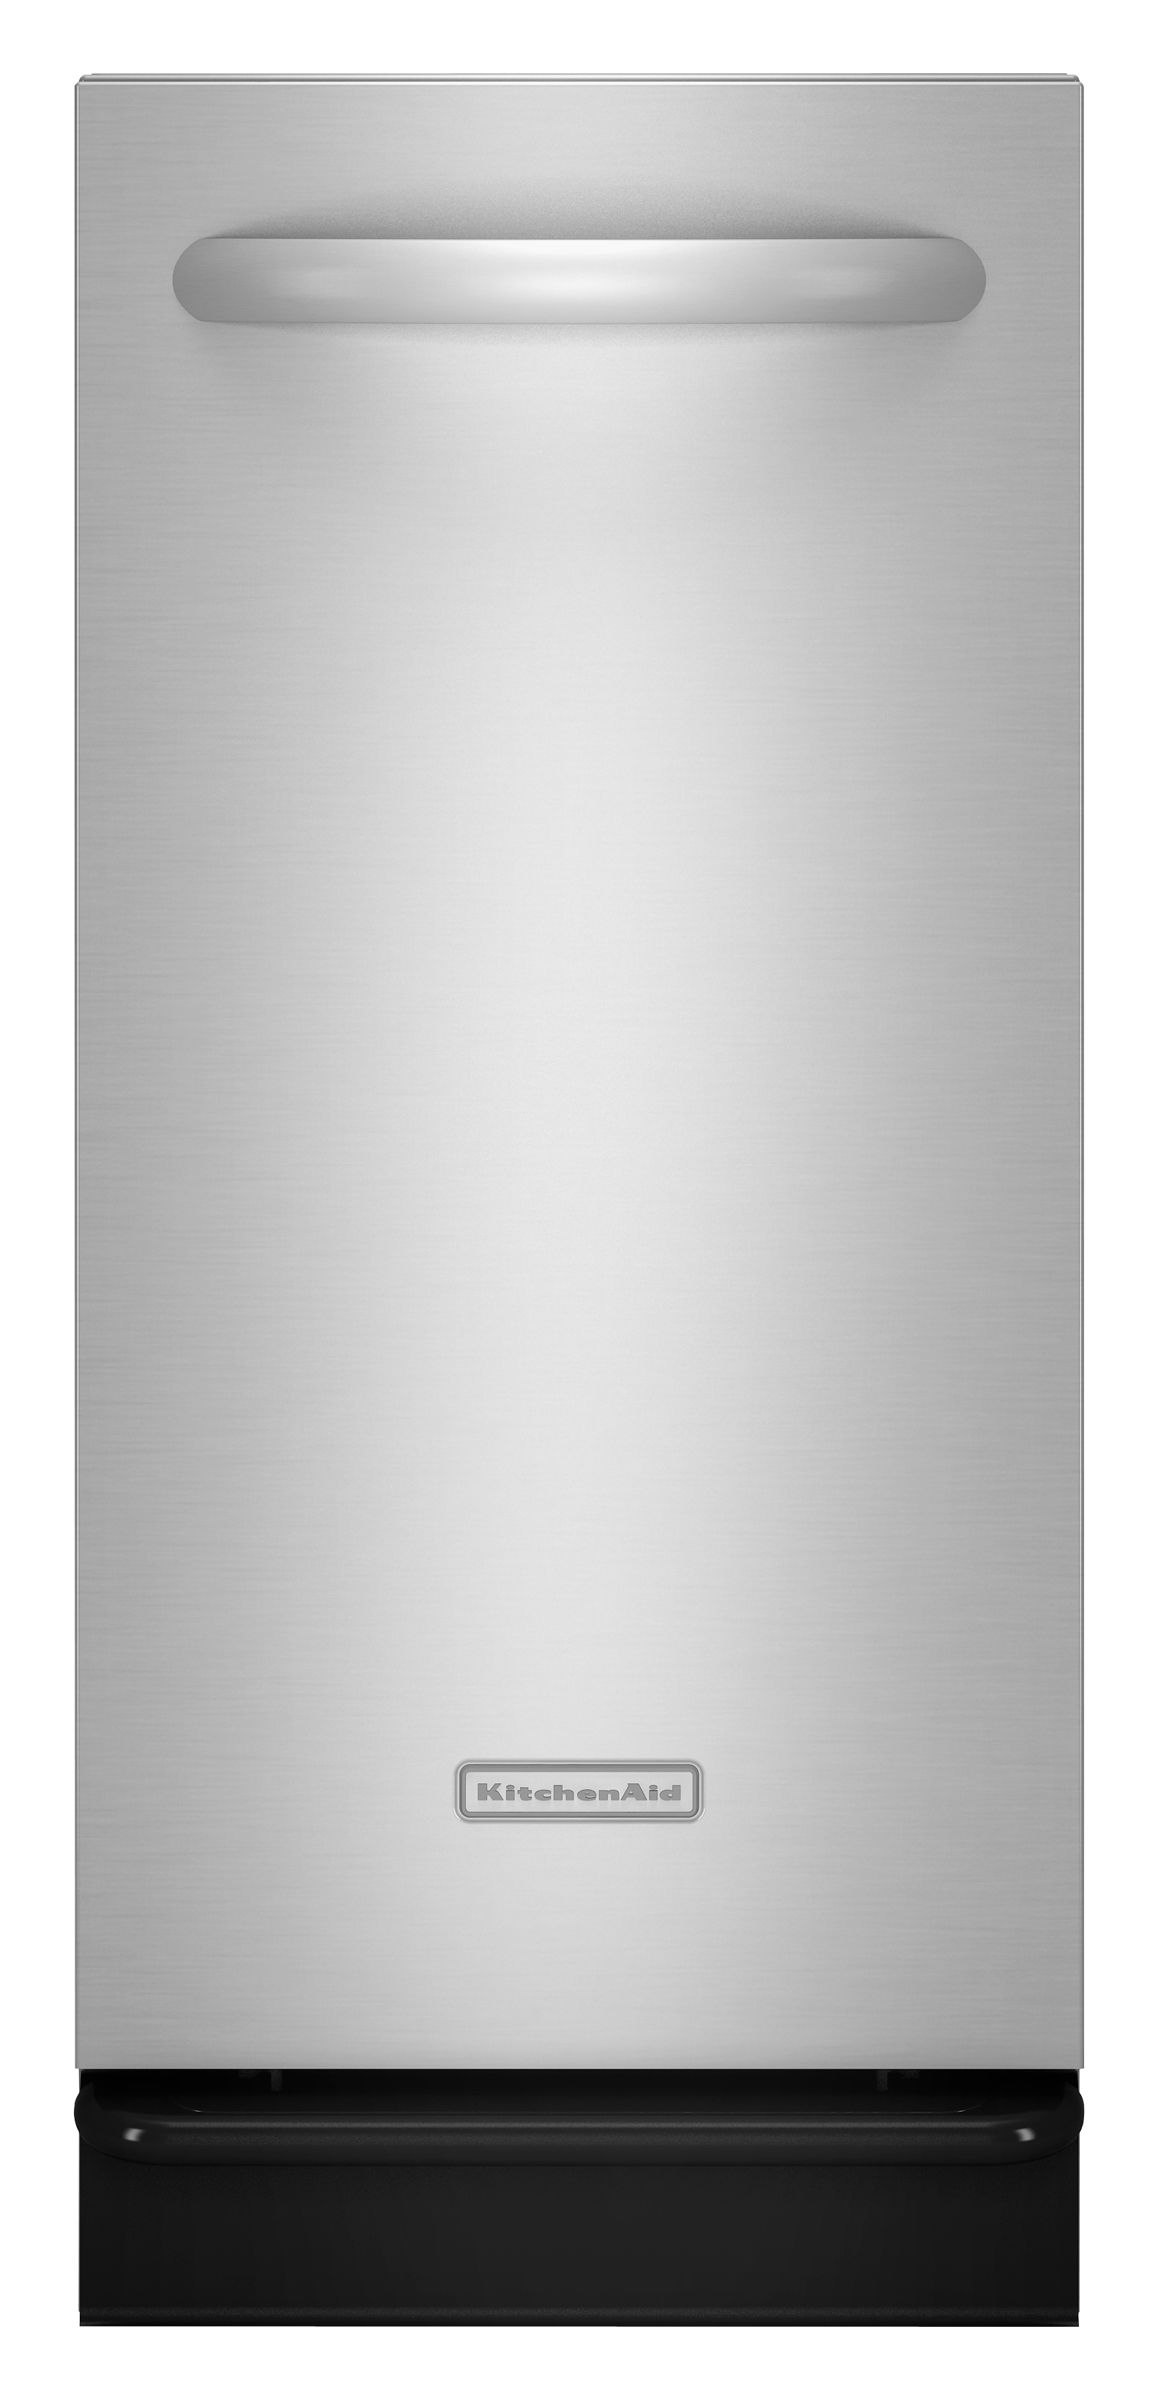 KitchenAid Built-in Trash Compactor - Stainless Steel White